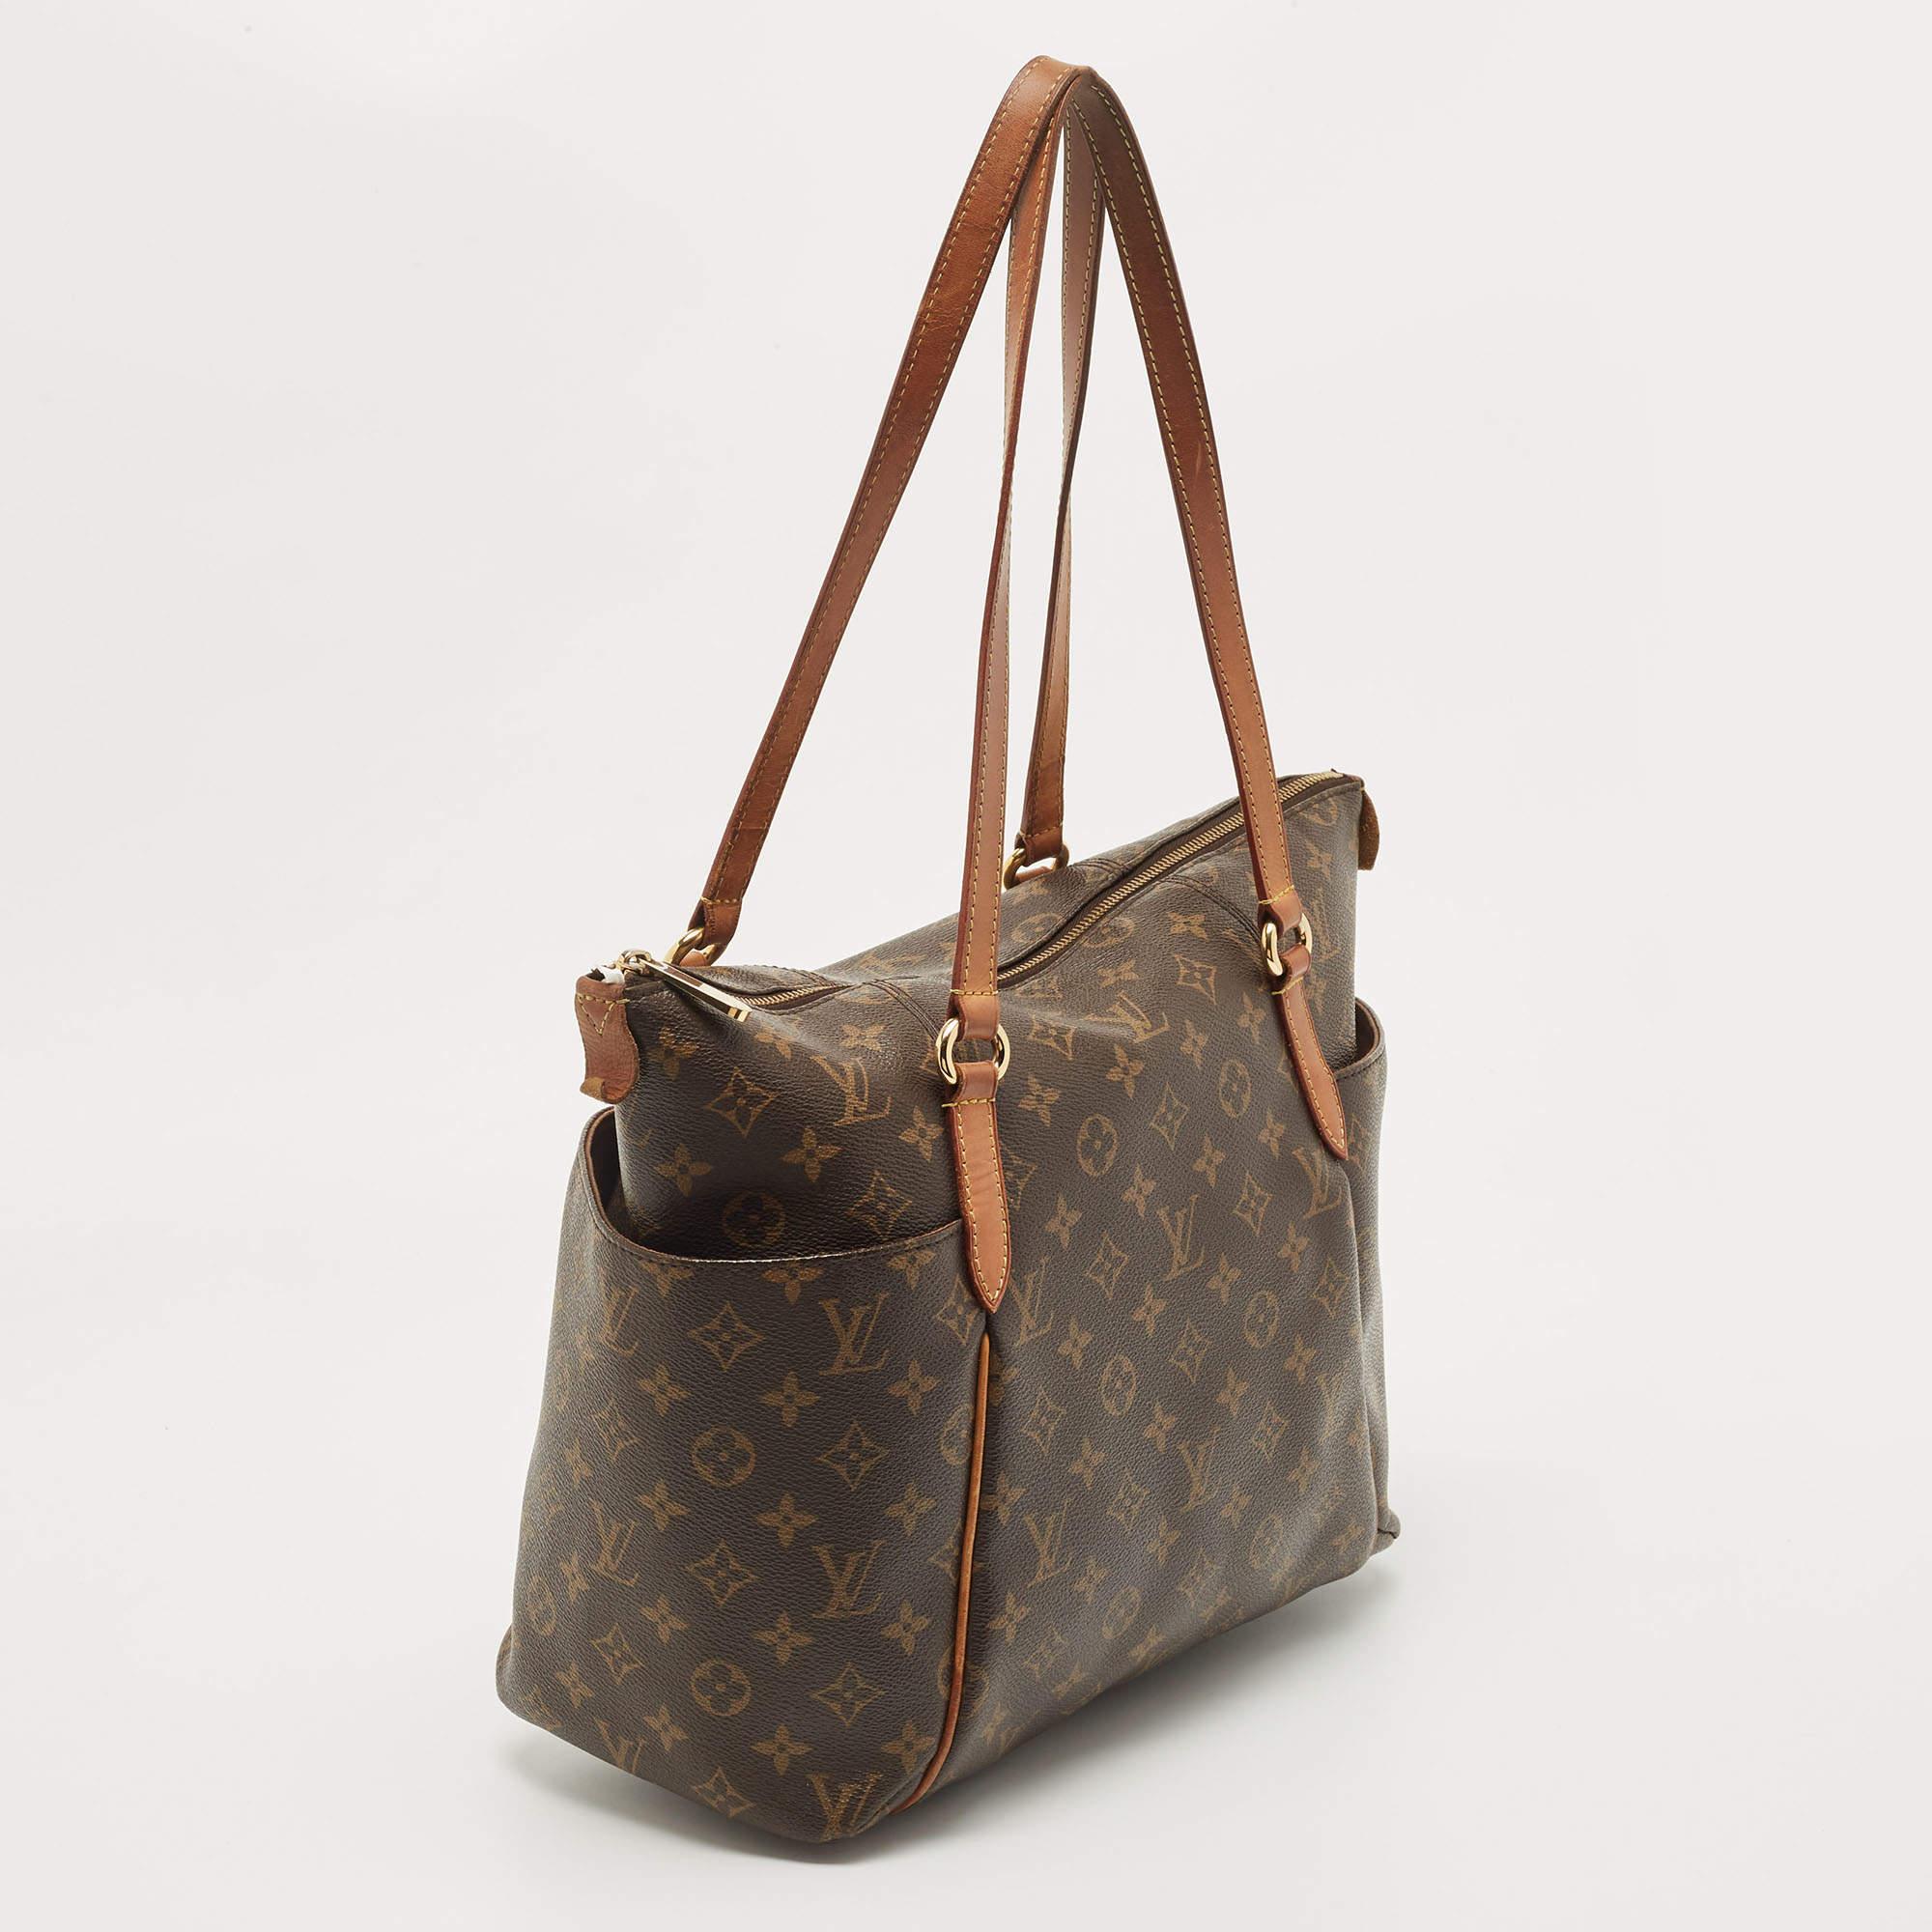 Made from Monogram canvas, this Totally MM Bag by Louis Vuitton exudes the right amount of luxury. The bag has two leather handles, a top zipper, and a spacious canvas interior. It also has additional open pockets on the sides and gold-tone hardware